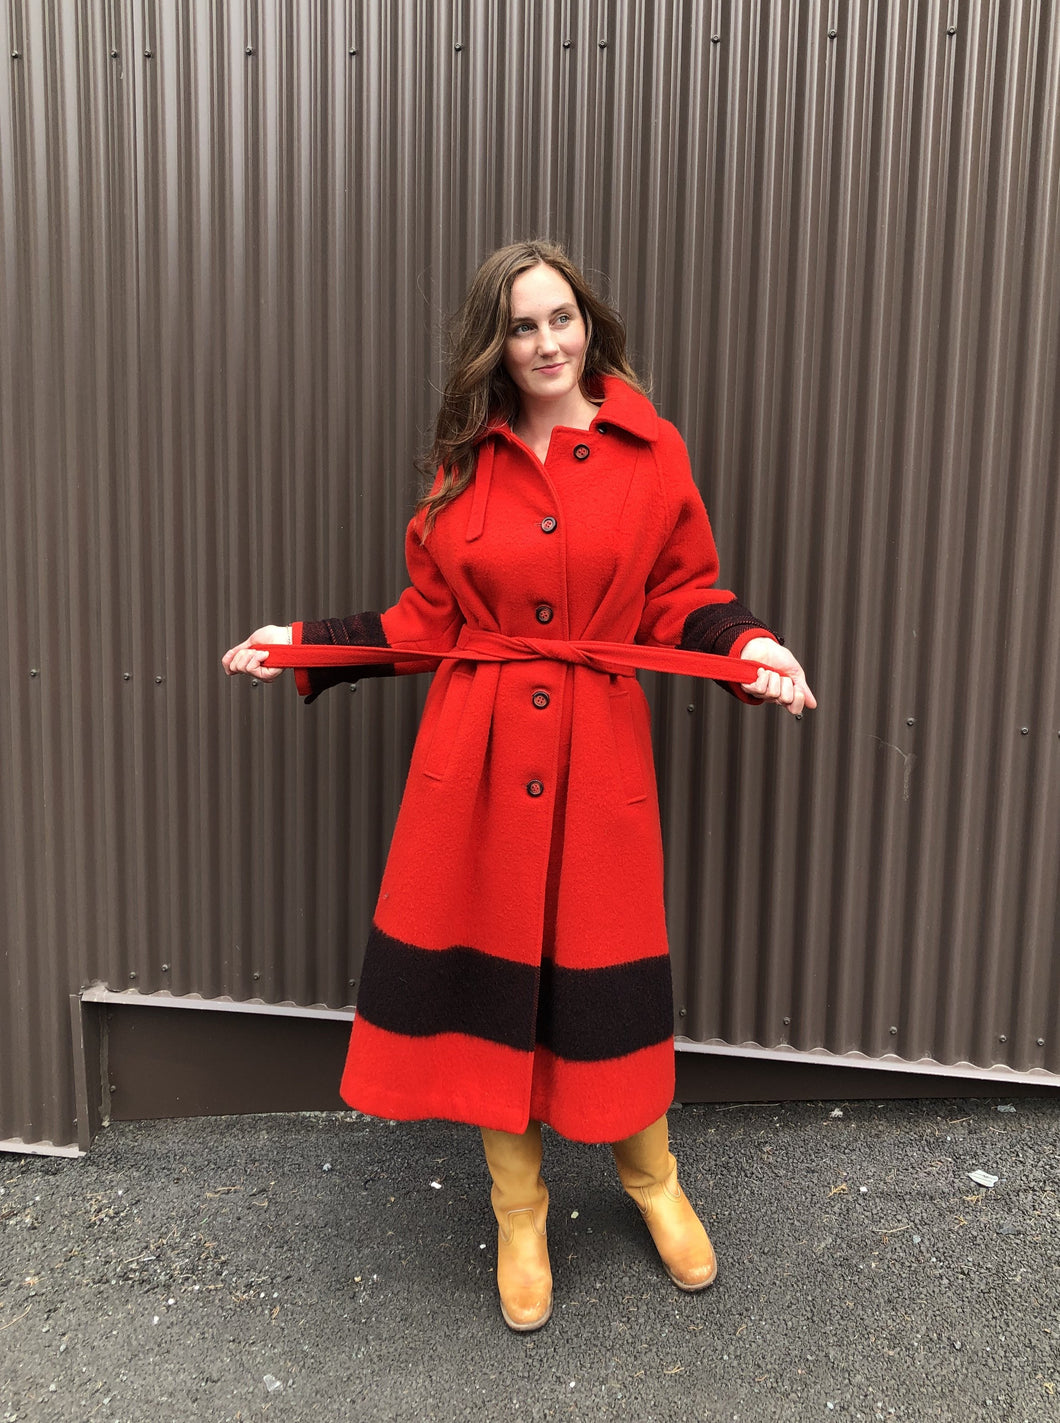 Kingspier Vintage - Hudson’s Bay Company red and black stripe 100% virgin wool point blanket coat in a swing coat style with belt, buckle detail at the collar, button closures, slash pockets and red lining. Size medium/ large.